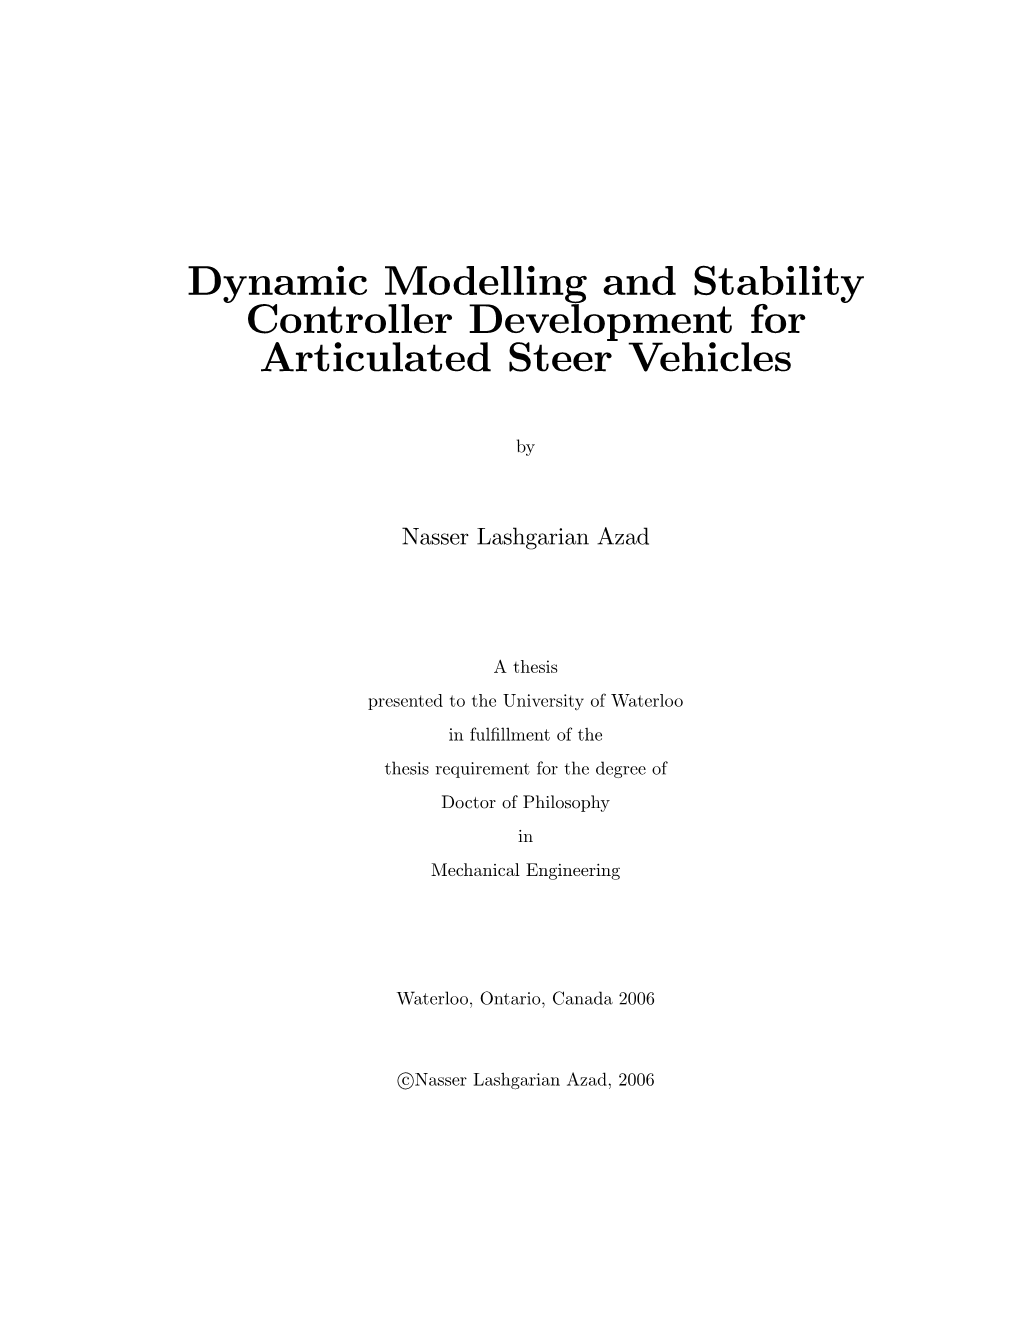 Dynamic Modelling and Stability Controller Development for Articulated Steer Vehicles